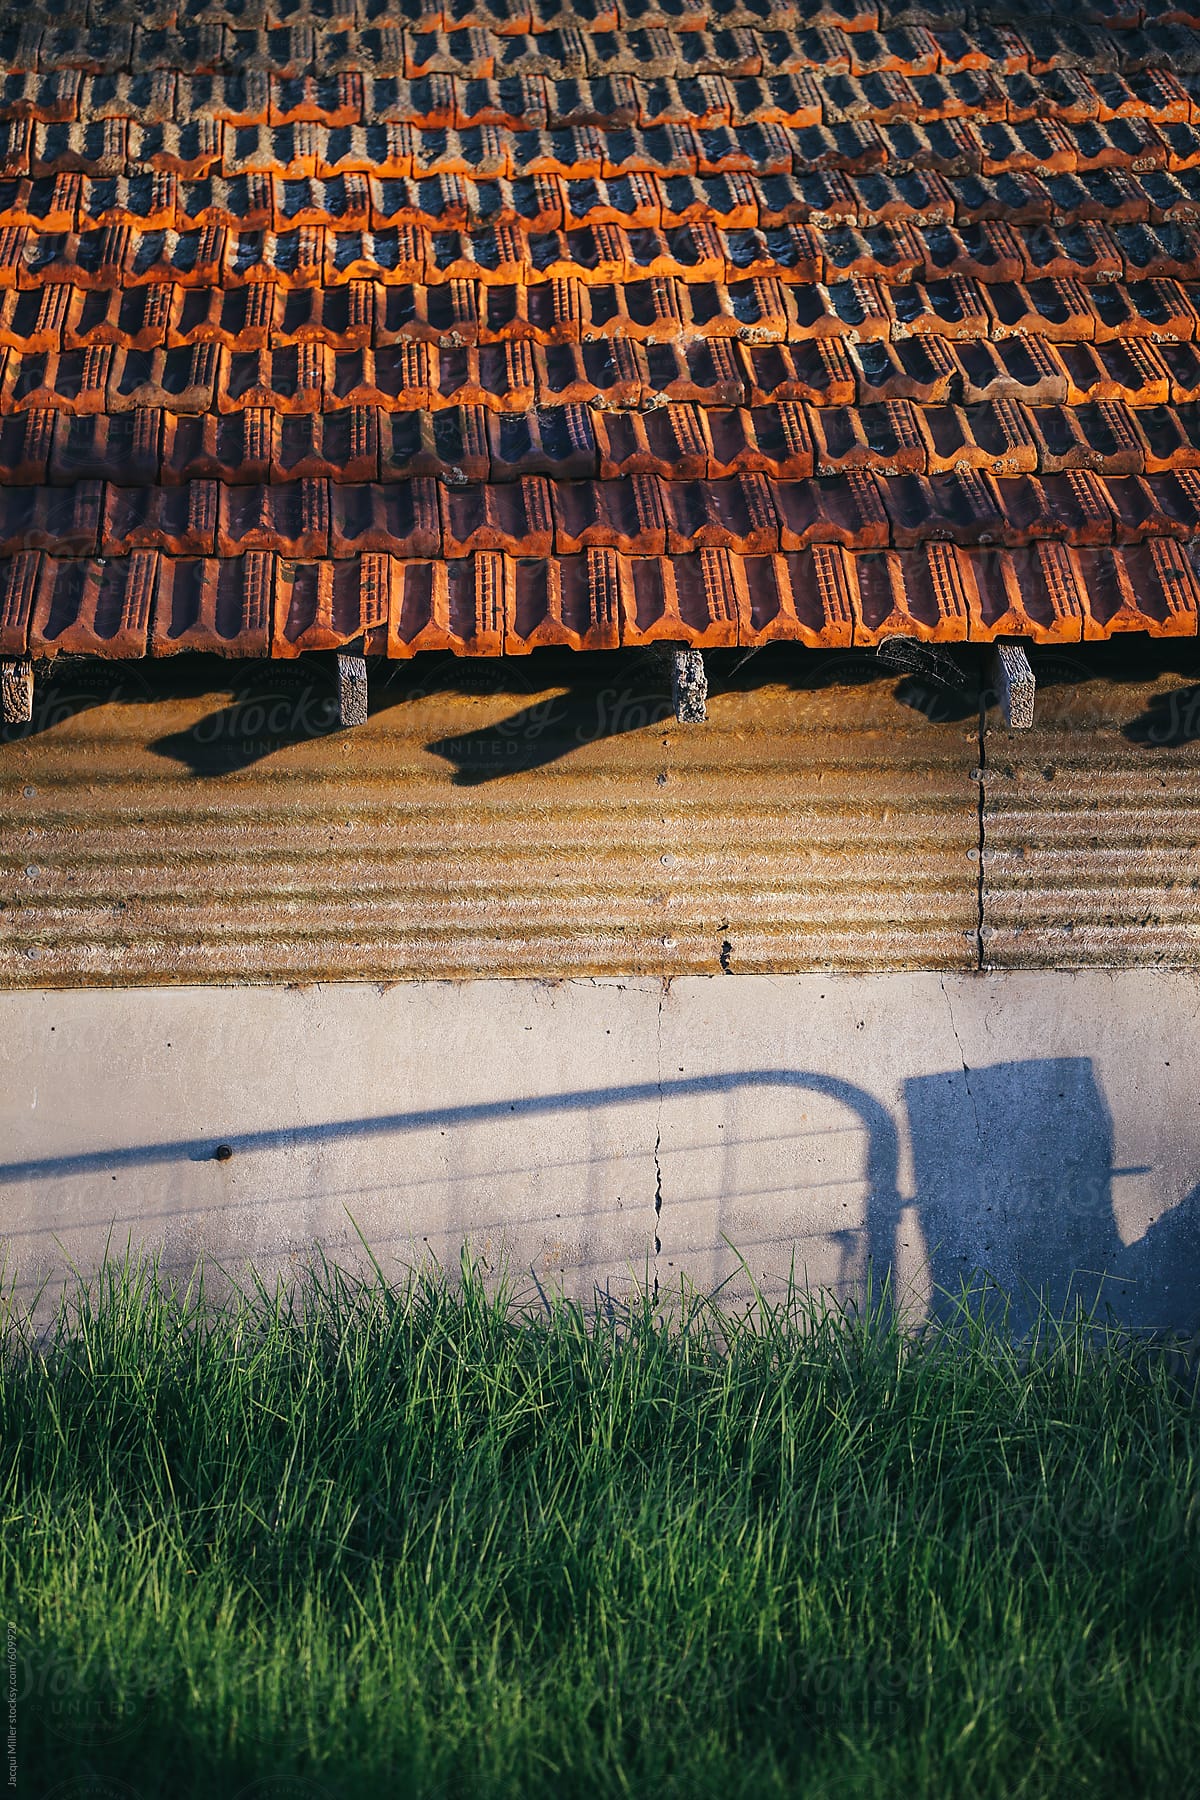 Layers of an old farm building with shadow of gate on wall - vertical